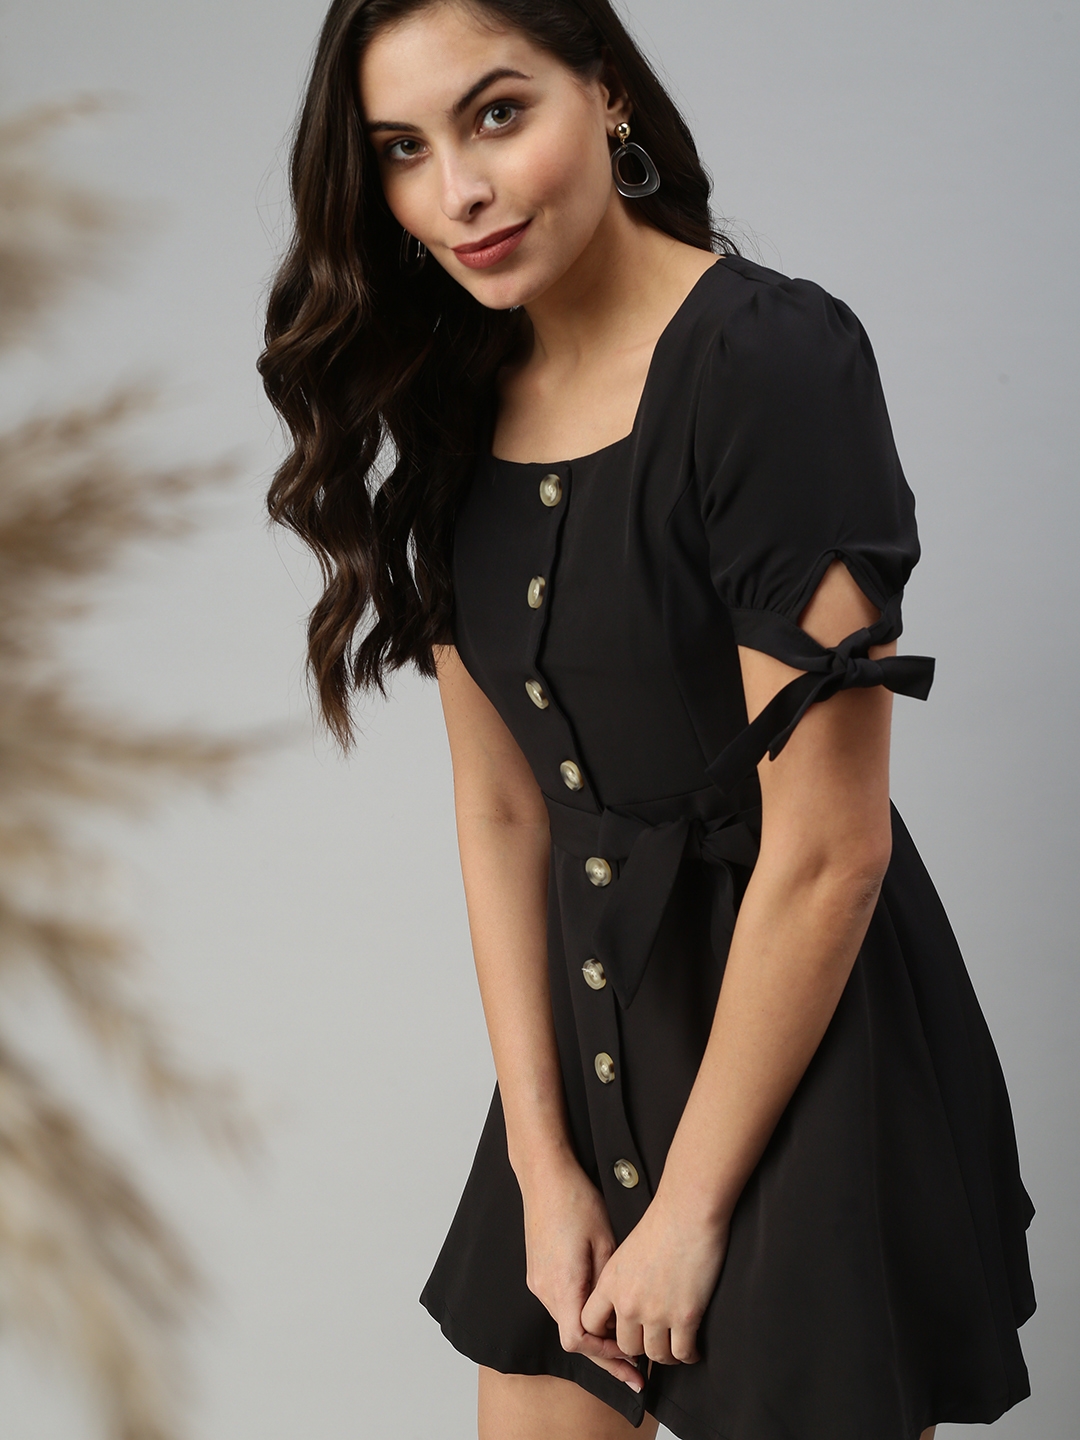 Women's Black Polyester Solid Dresses